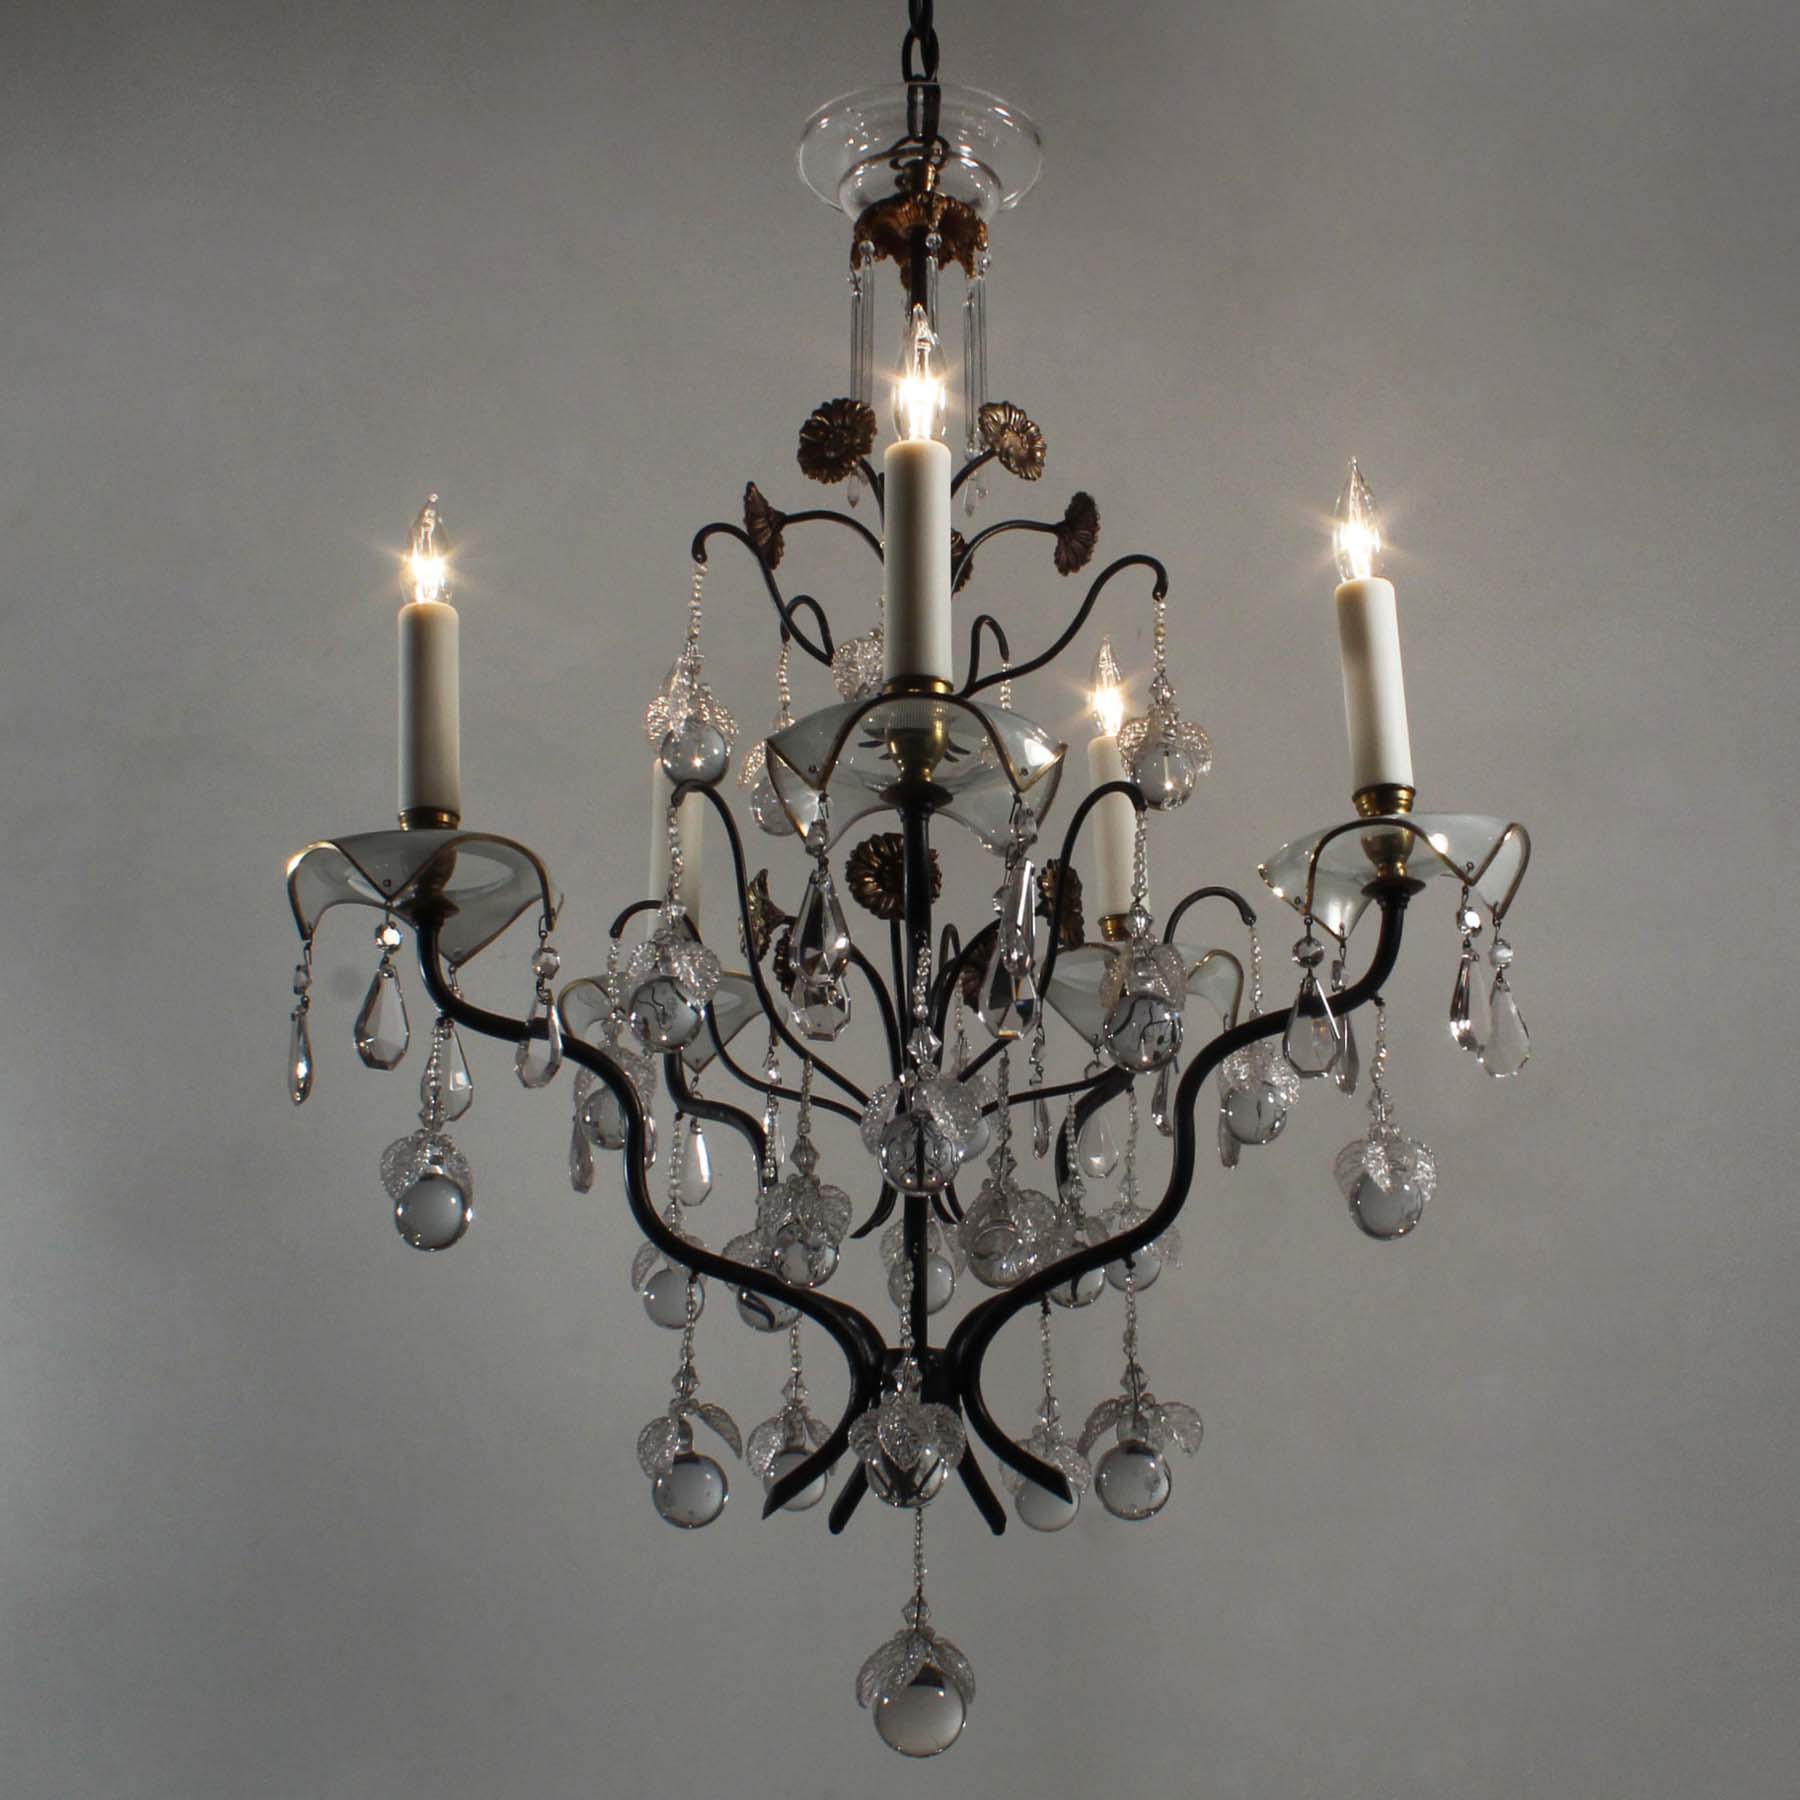 SOLD Antique Neoclassical Chandelier with Unusual Prisms-69943